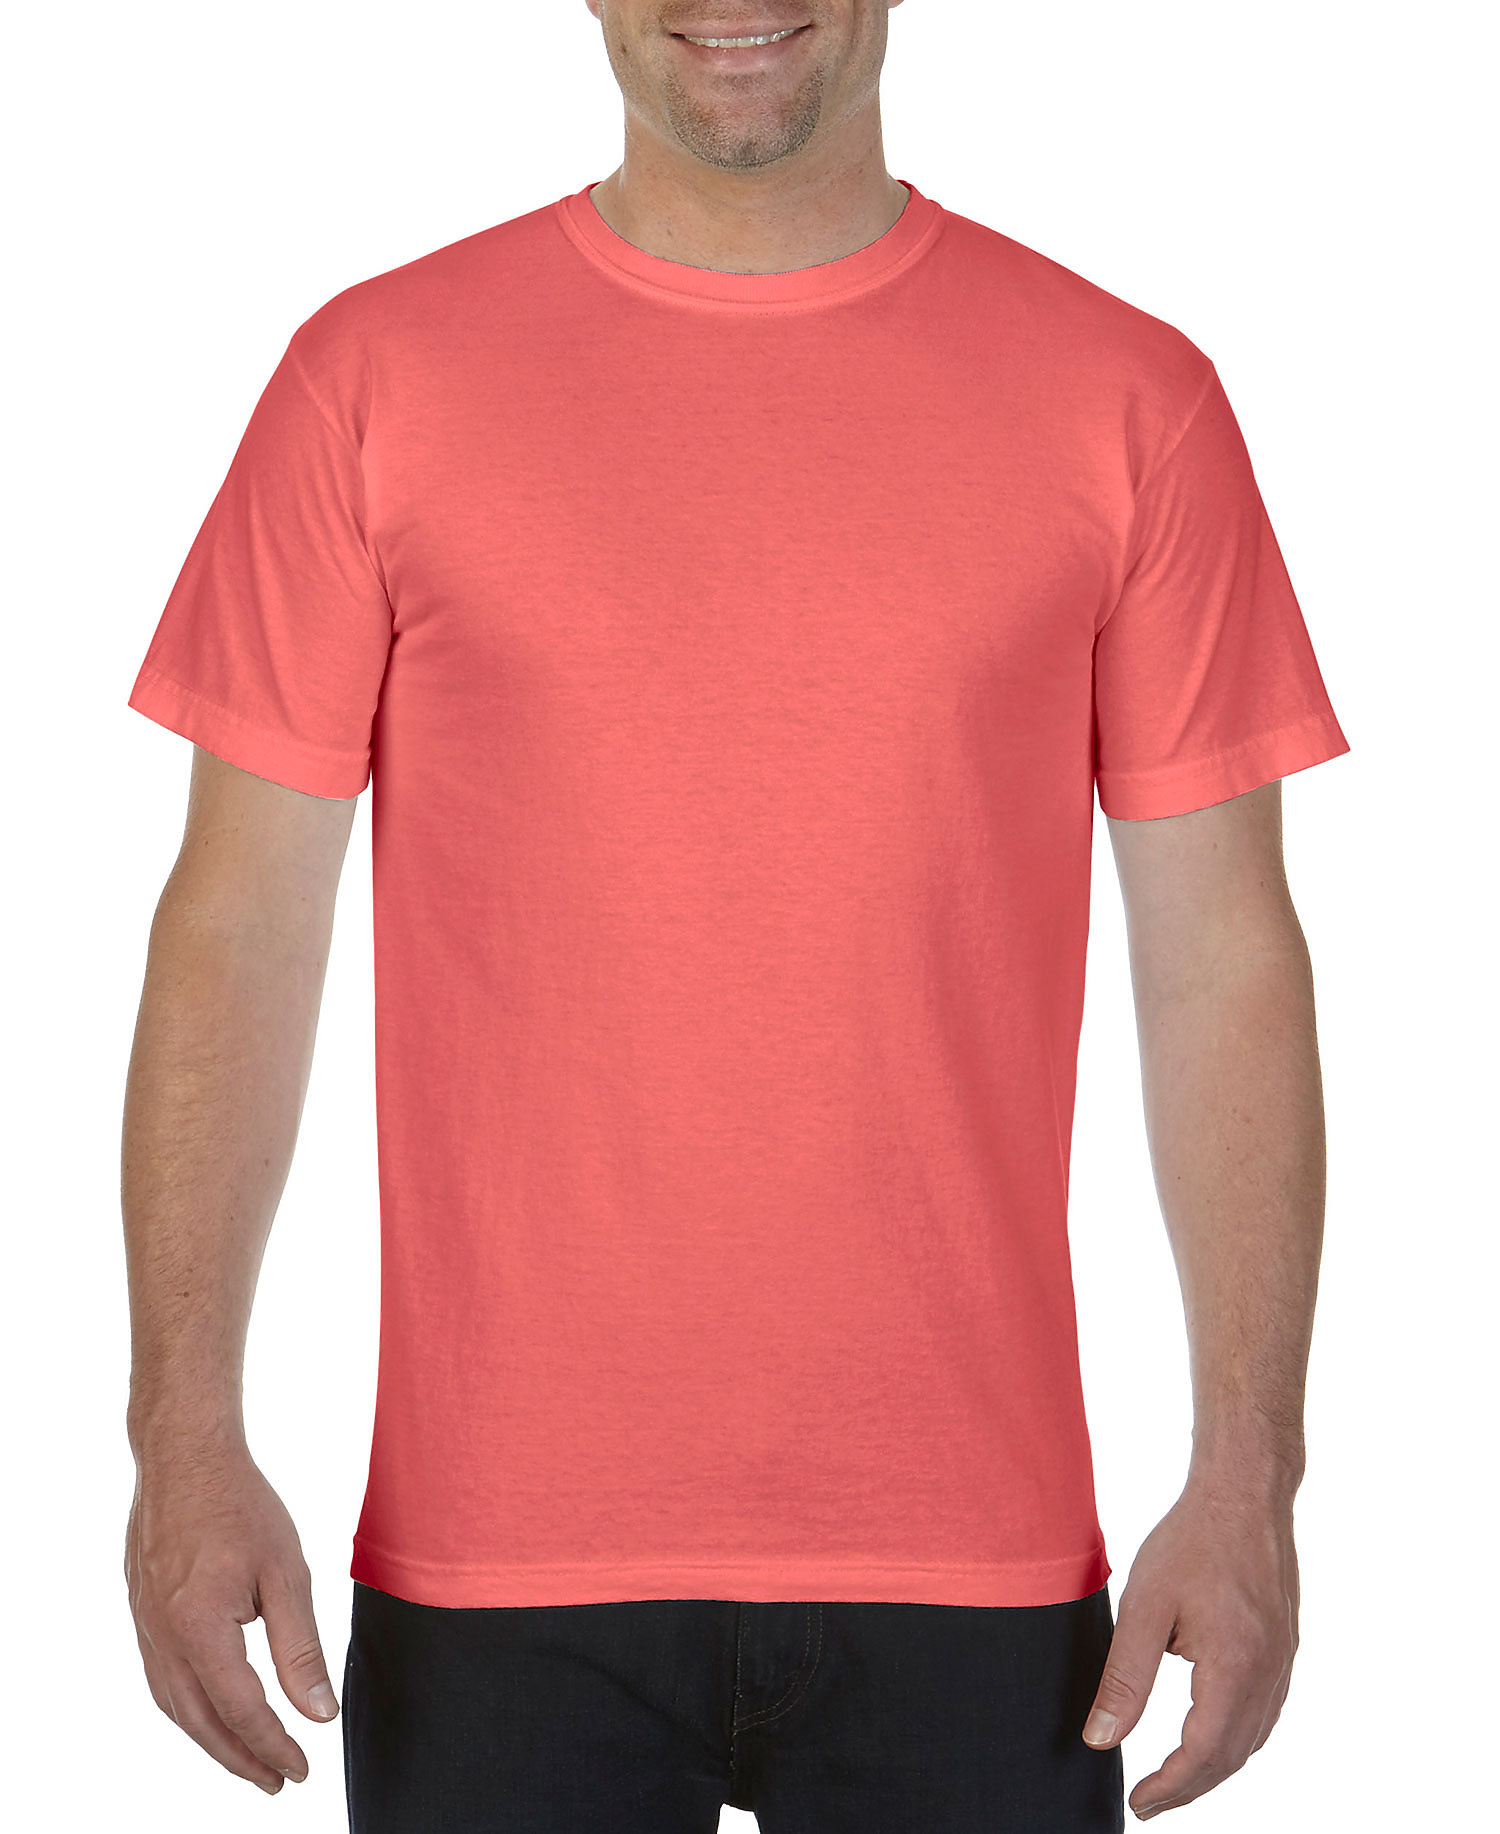 click to view Neon Red Orange